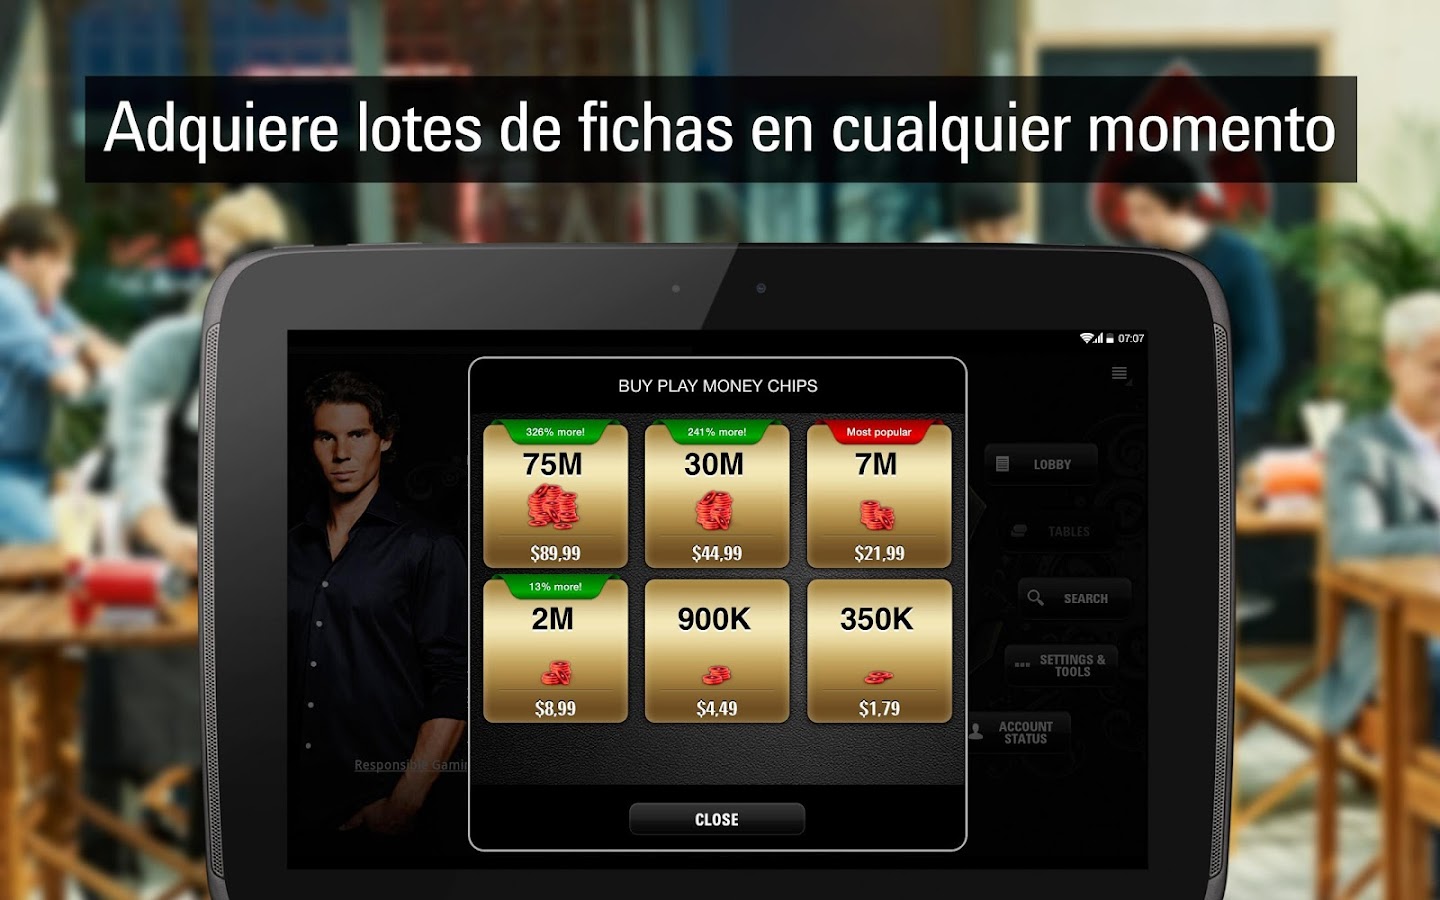 Poker dinero real android mejores casino Bitcoin 400733